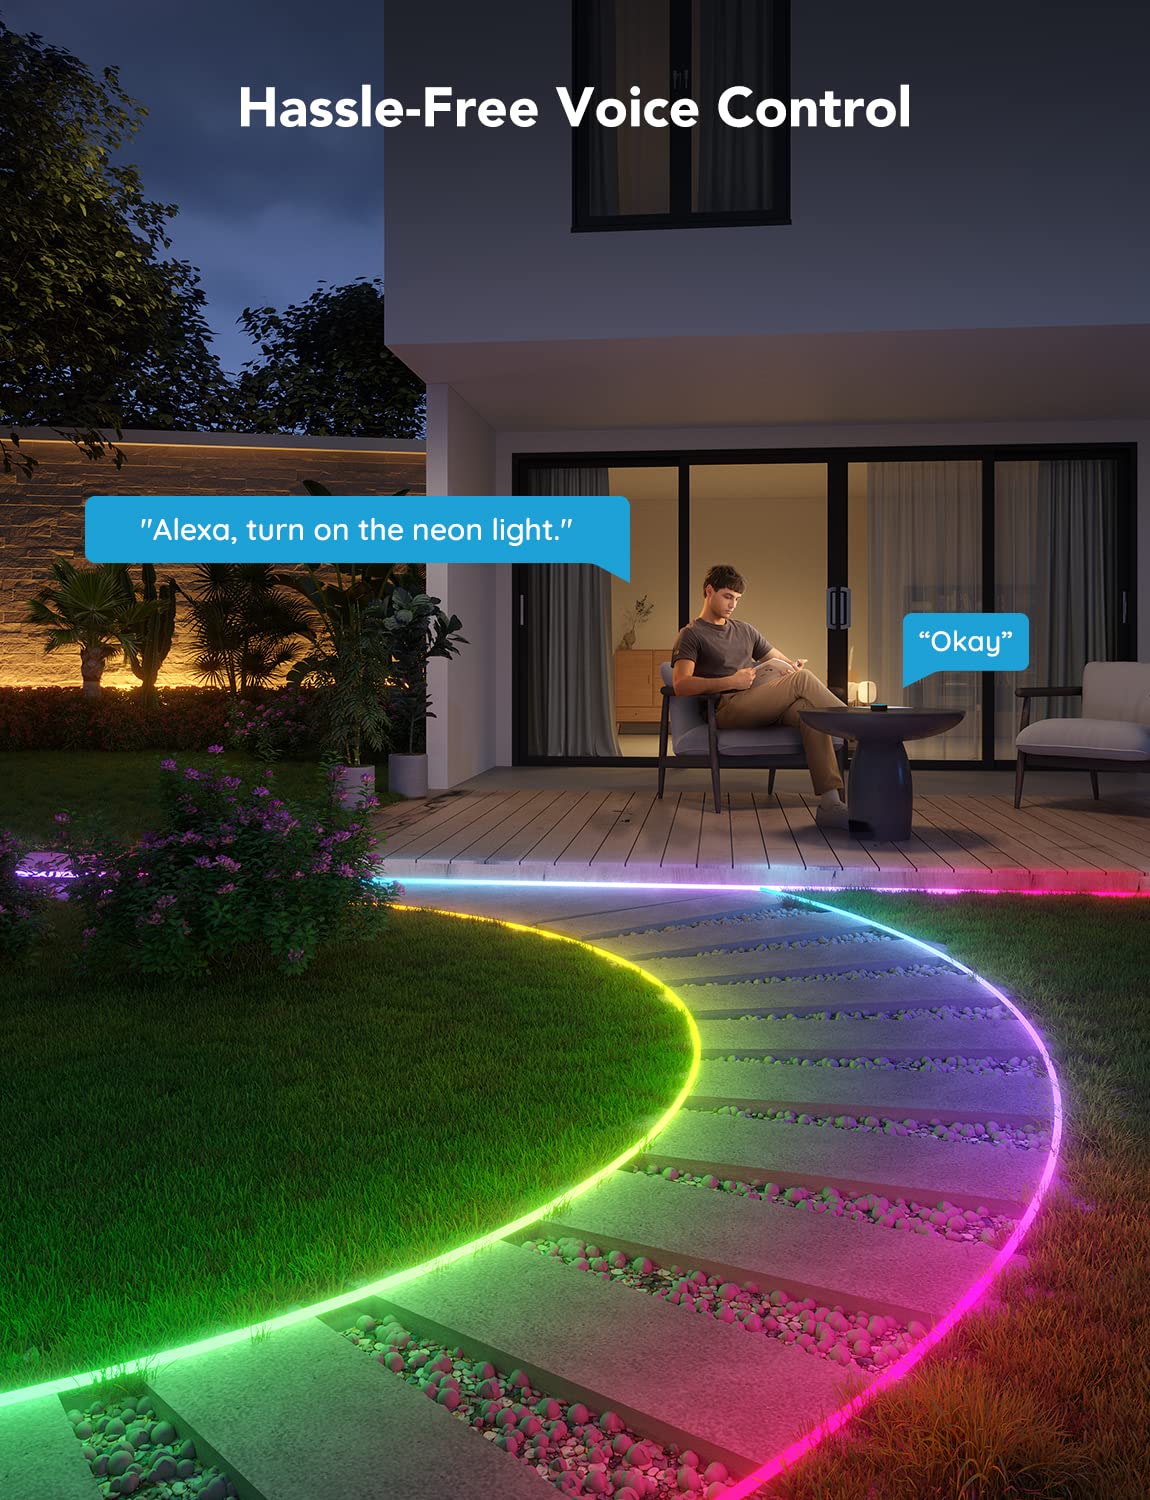 Govee Outdoor Neon Rope Lights, 32.8ft RGBIC IP67 Waterproof Neon Lights with 64+ Scenes, Music Sync, Flexible LED Rope Lights for Yard Garden Patio, Works with Alexa, Google Assistant